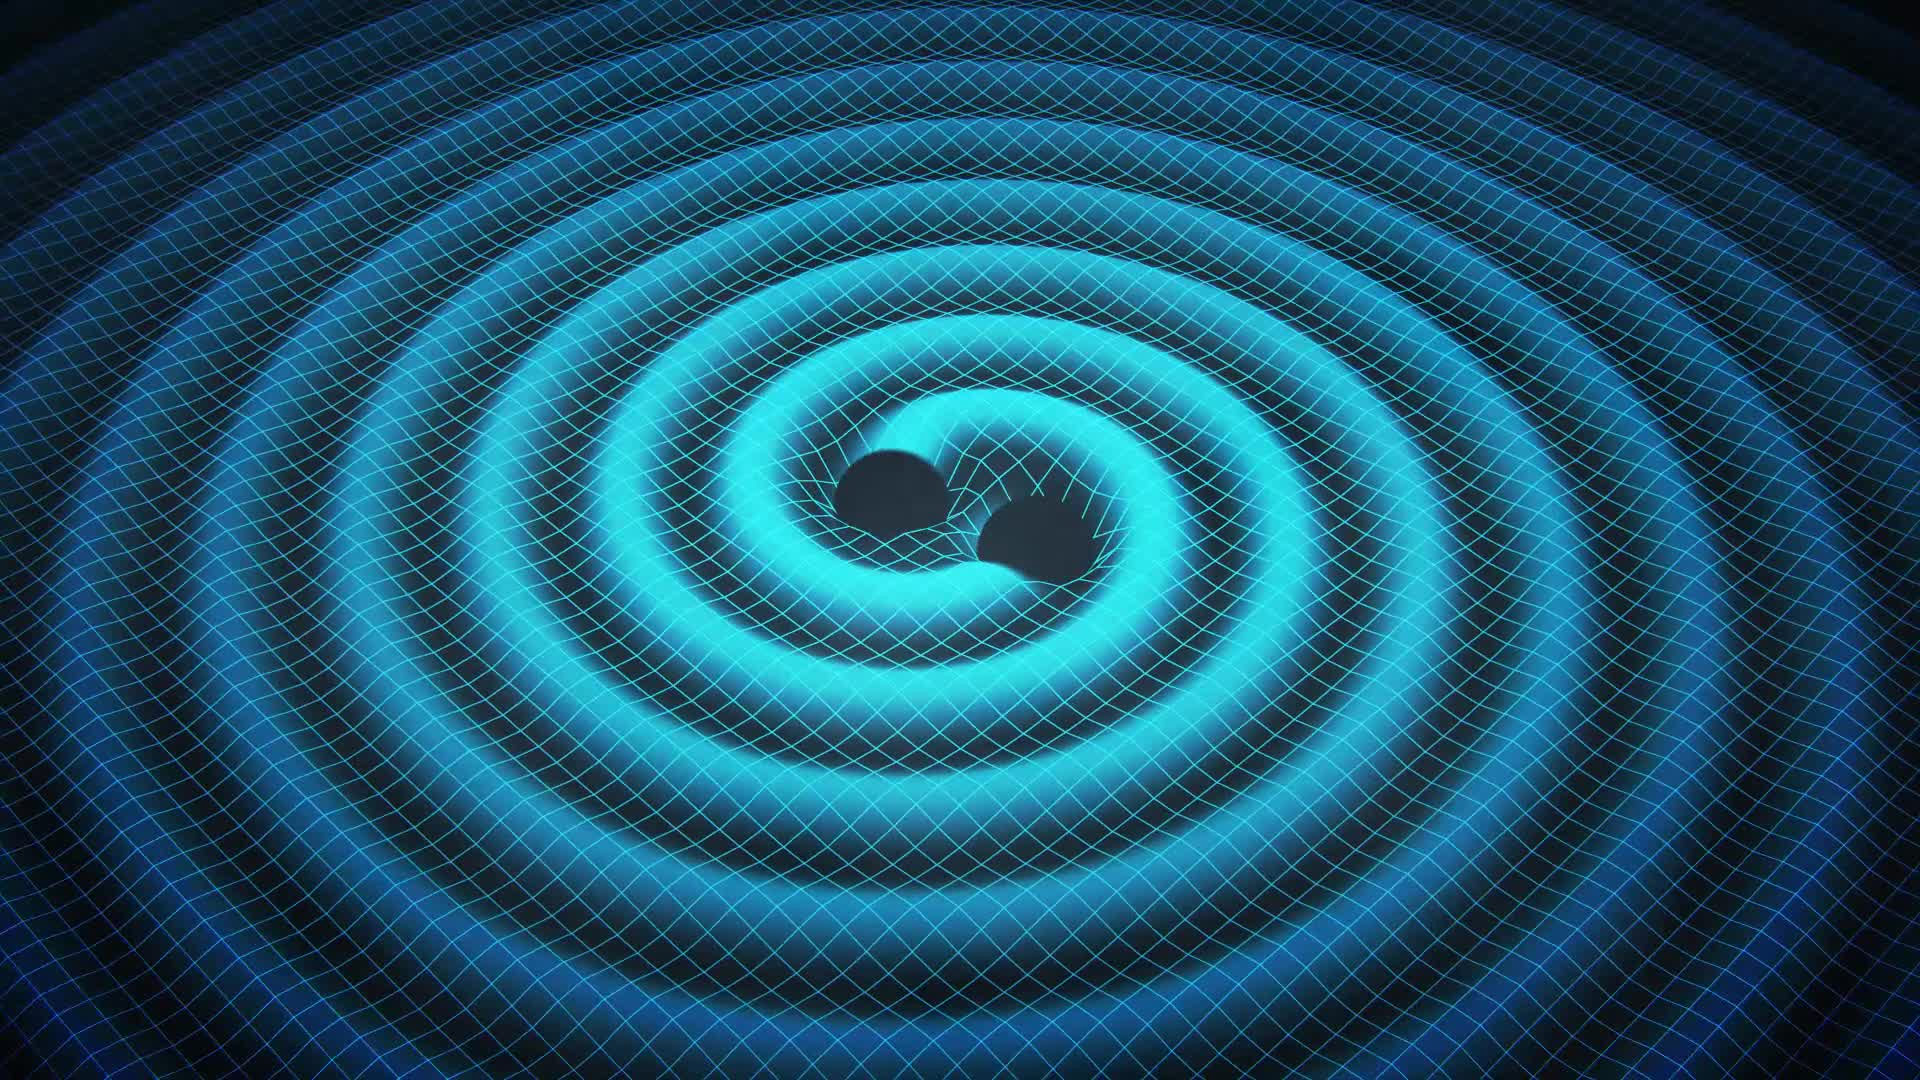 Excitement Amongst Scientists as Gravitational Waves May Be Proven to Exist